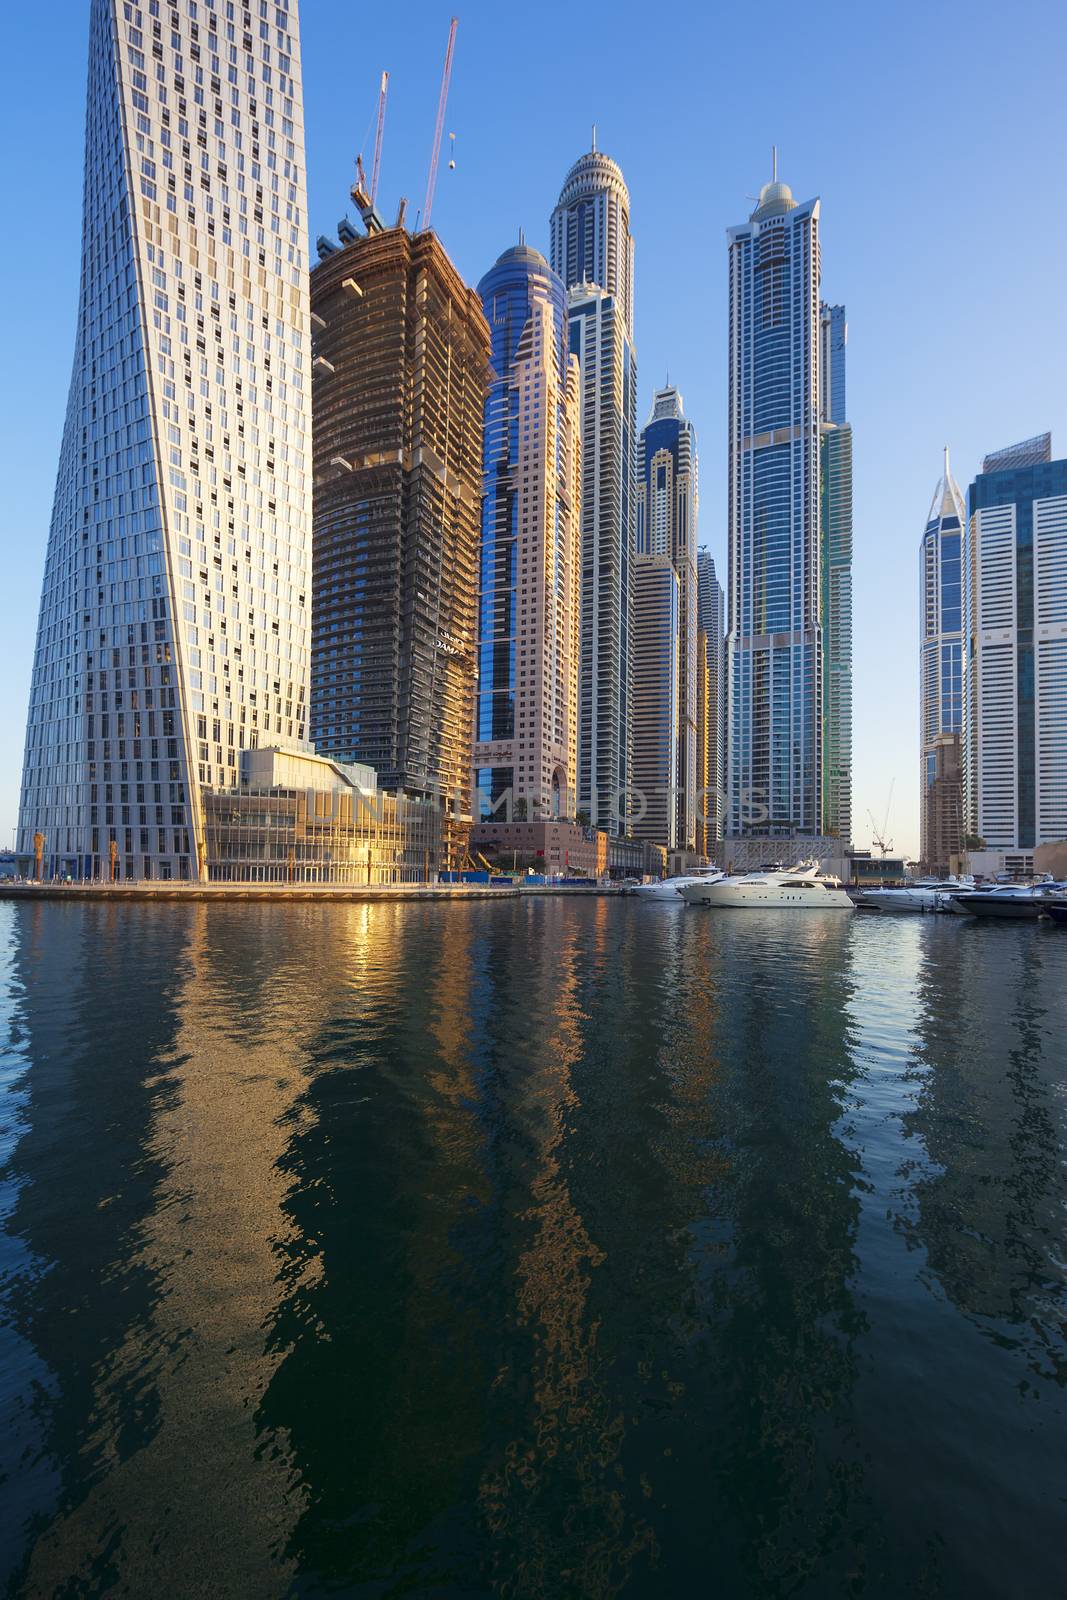 View in the Dubai Marina by vwalakte